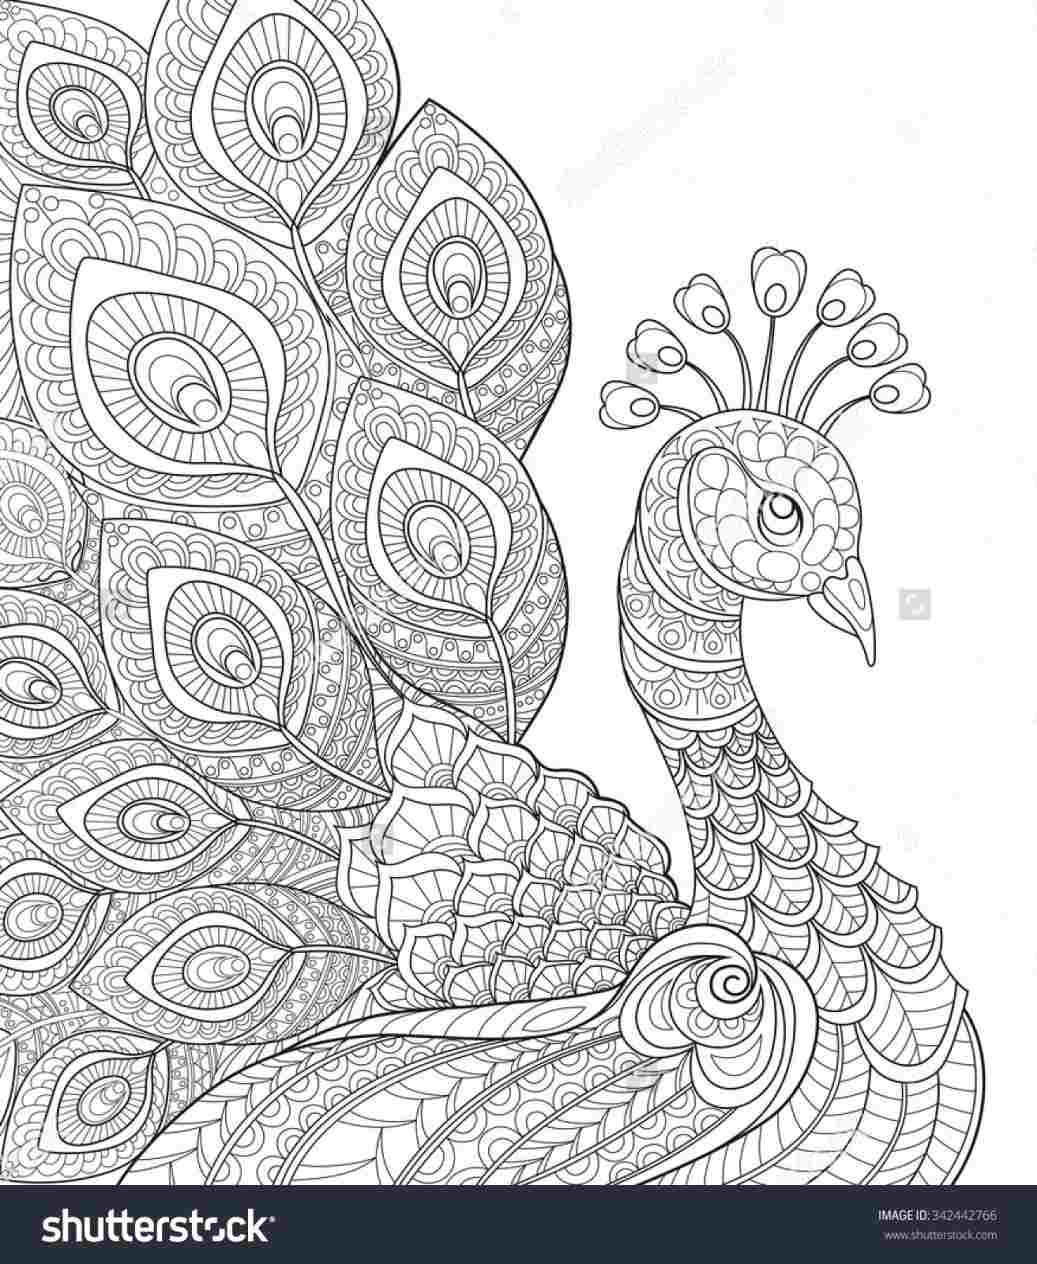 Peacock Embroidery Patterns Wheeler Embroidery Patterns Design Rhpinterestcom Laura Colouring